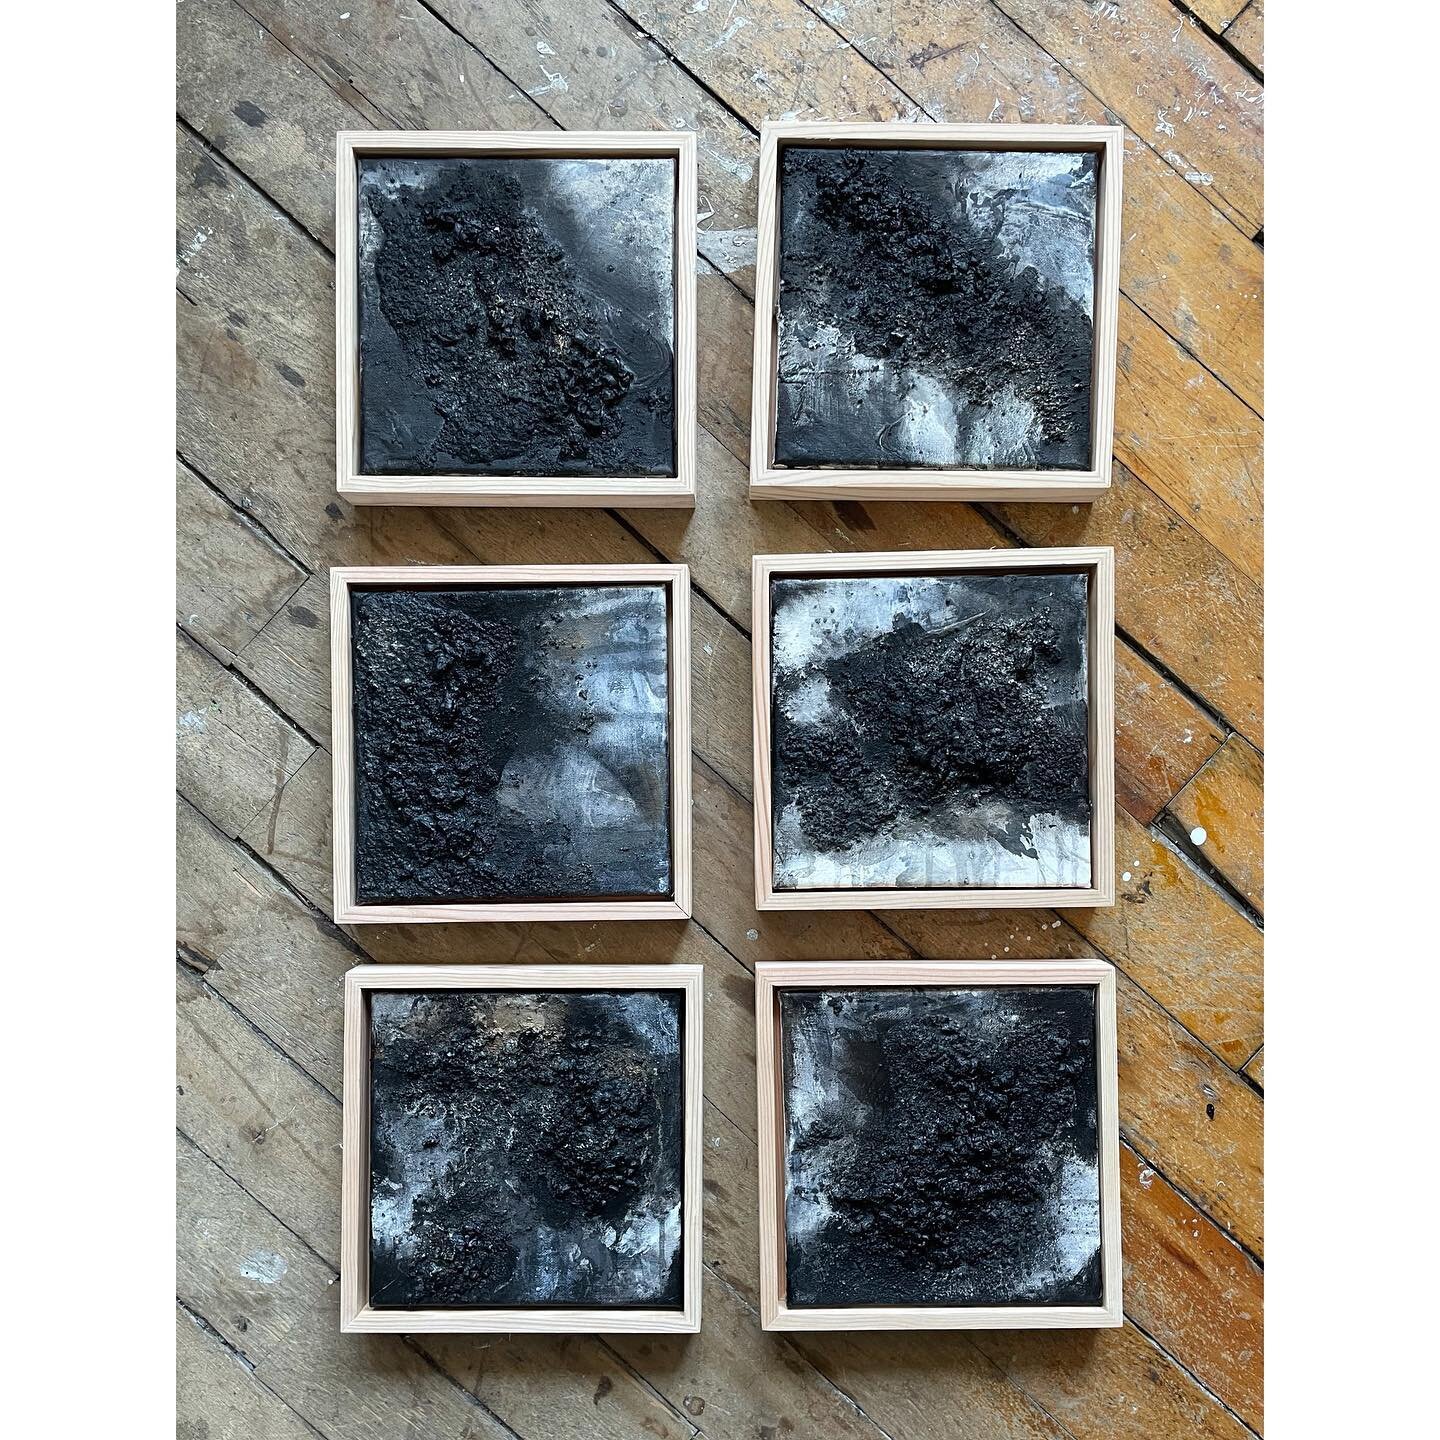 Small foundry series available: 8&rdquo;x8&rdquo;framed for $200 each&hellip;message me to get your hands on one!